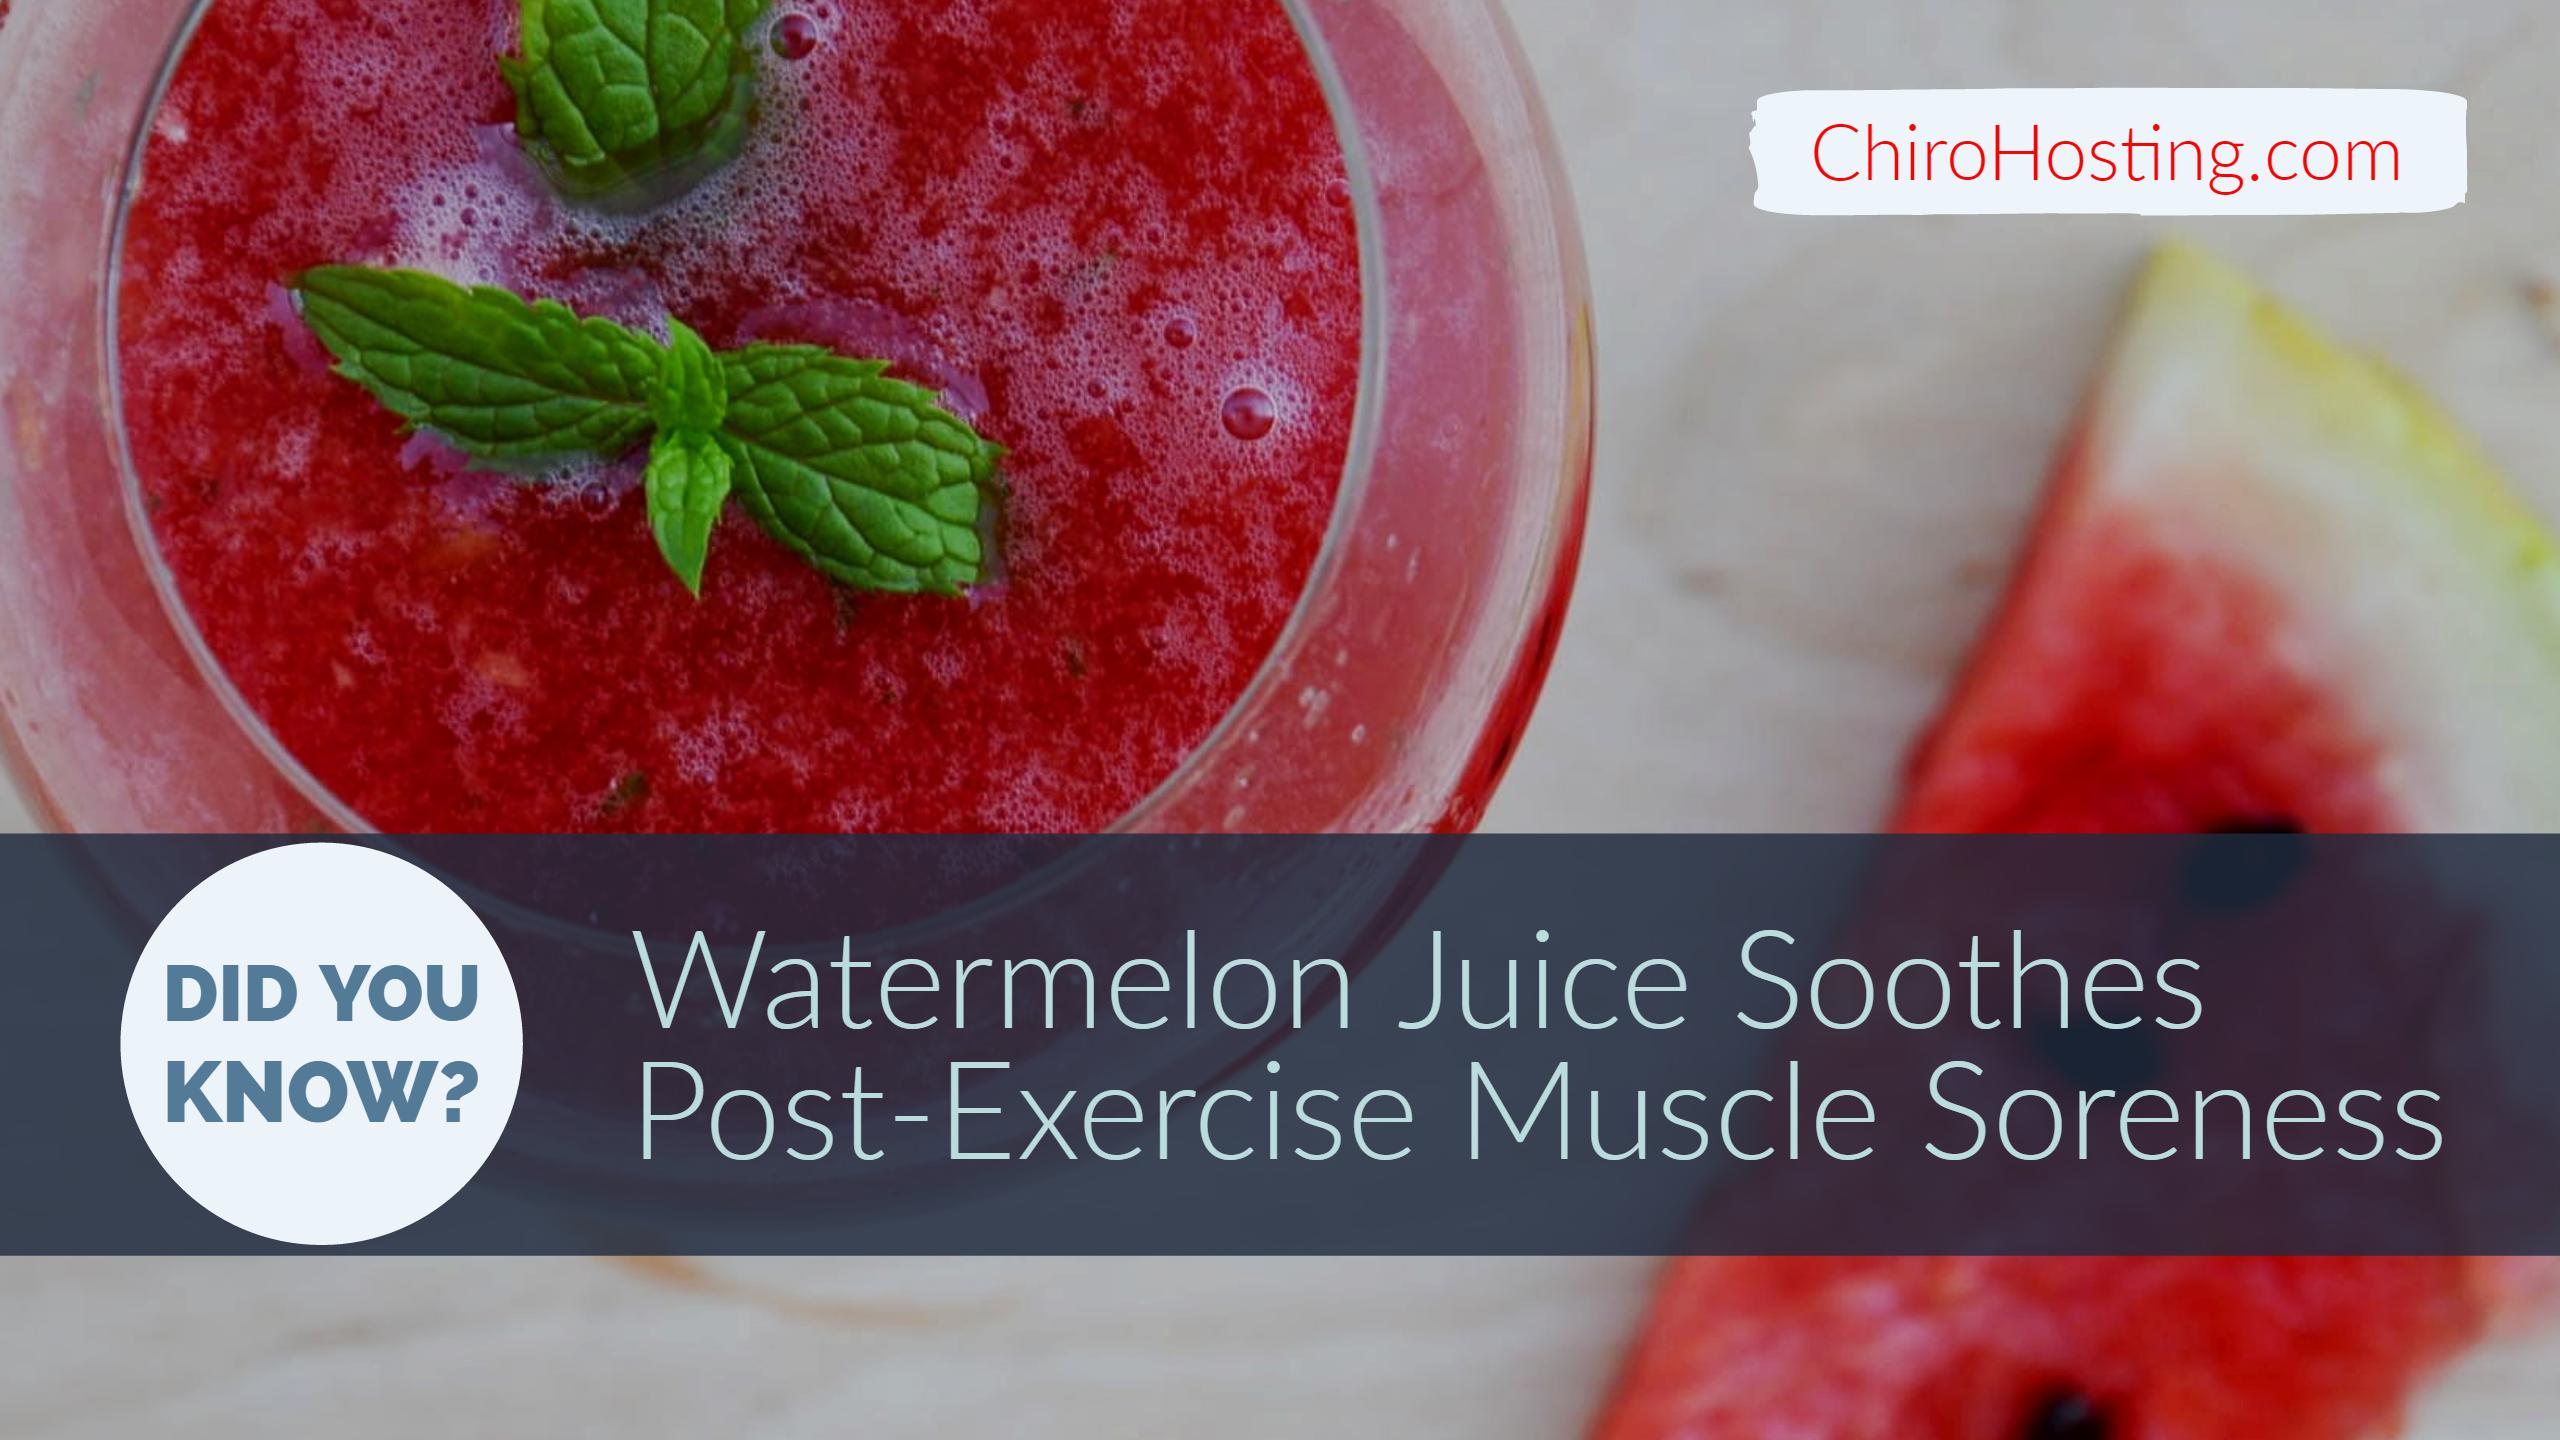 Watermelon Juice Soothes Post-Exercise Muscle Soreness